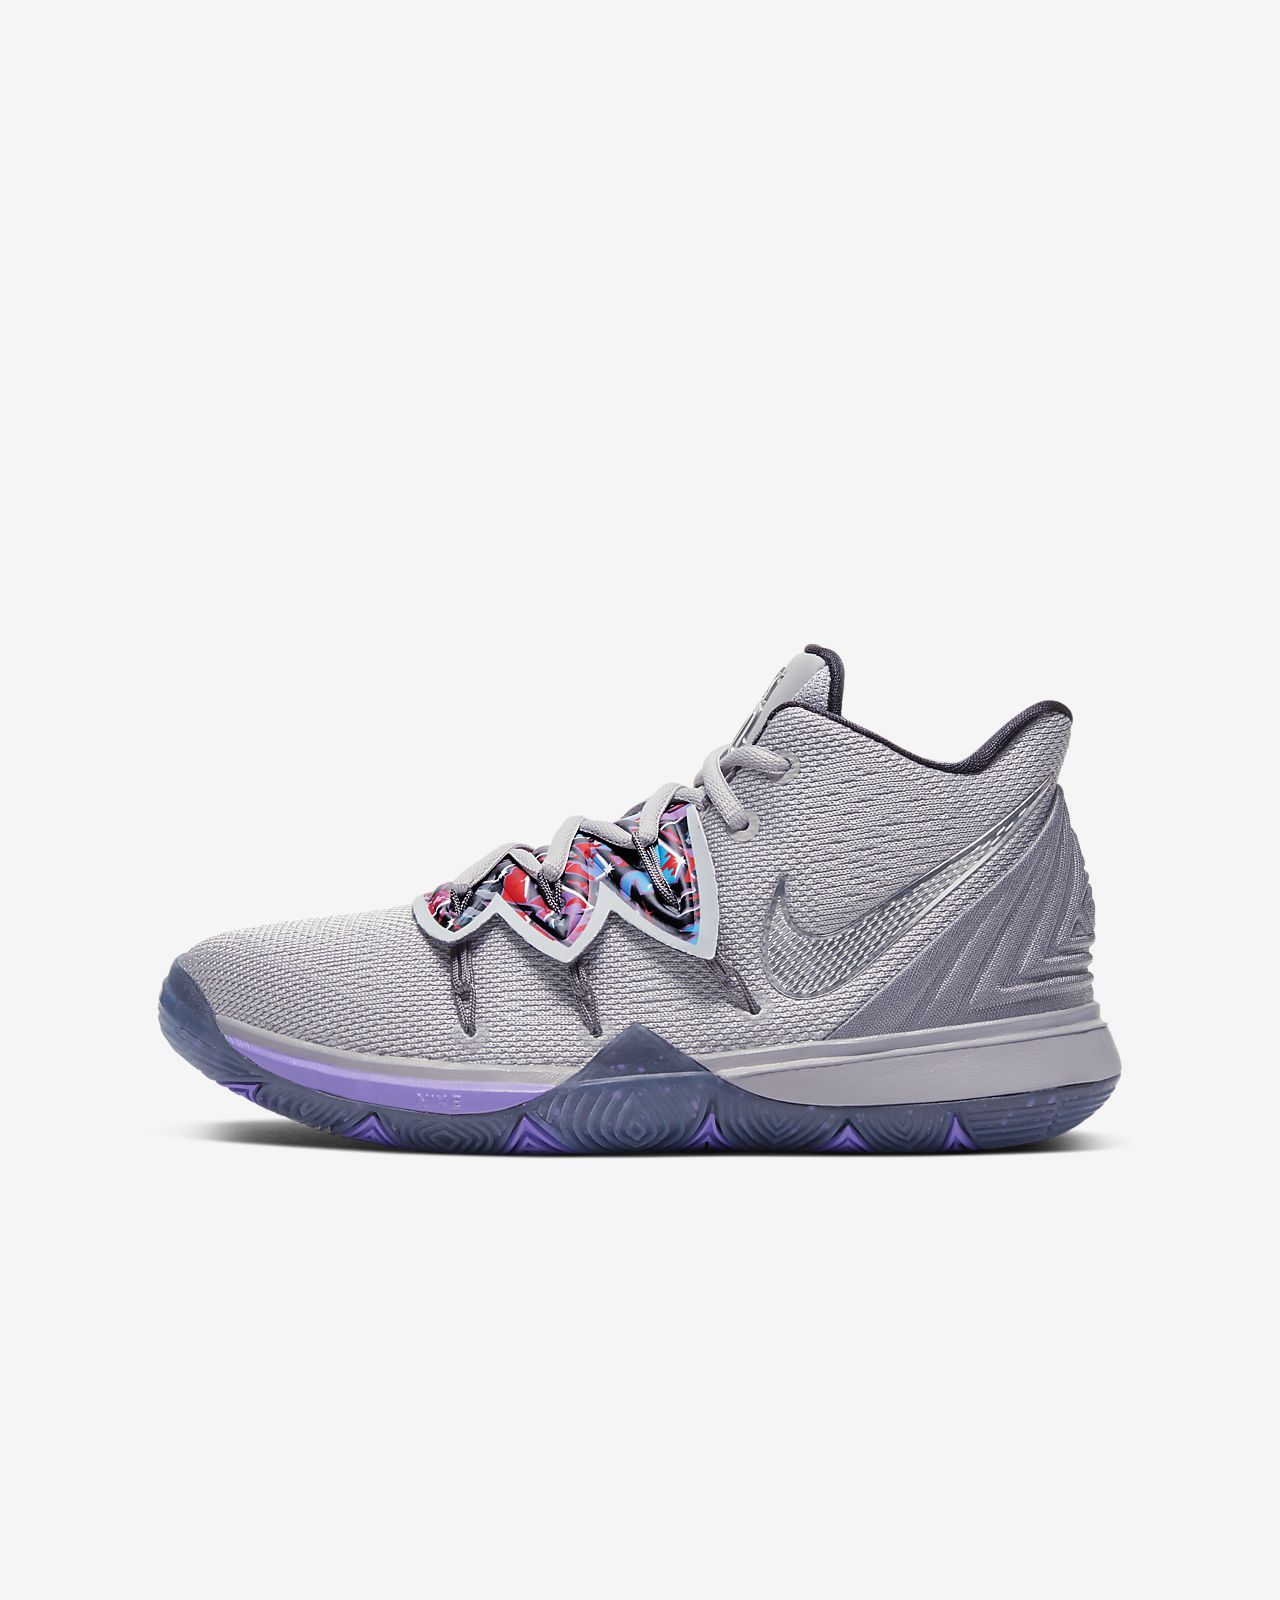 kyrie irving shoes 5 kids